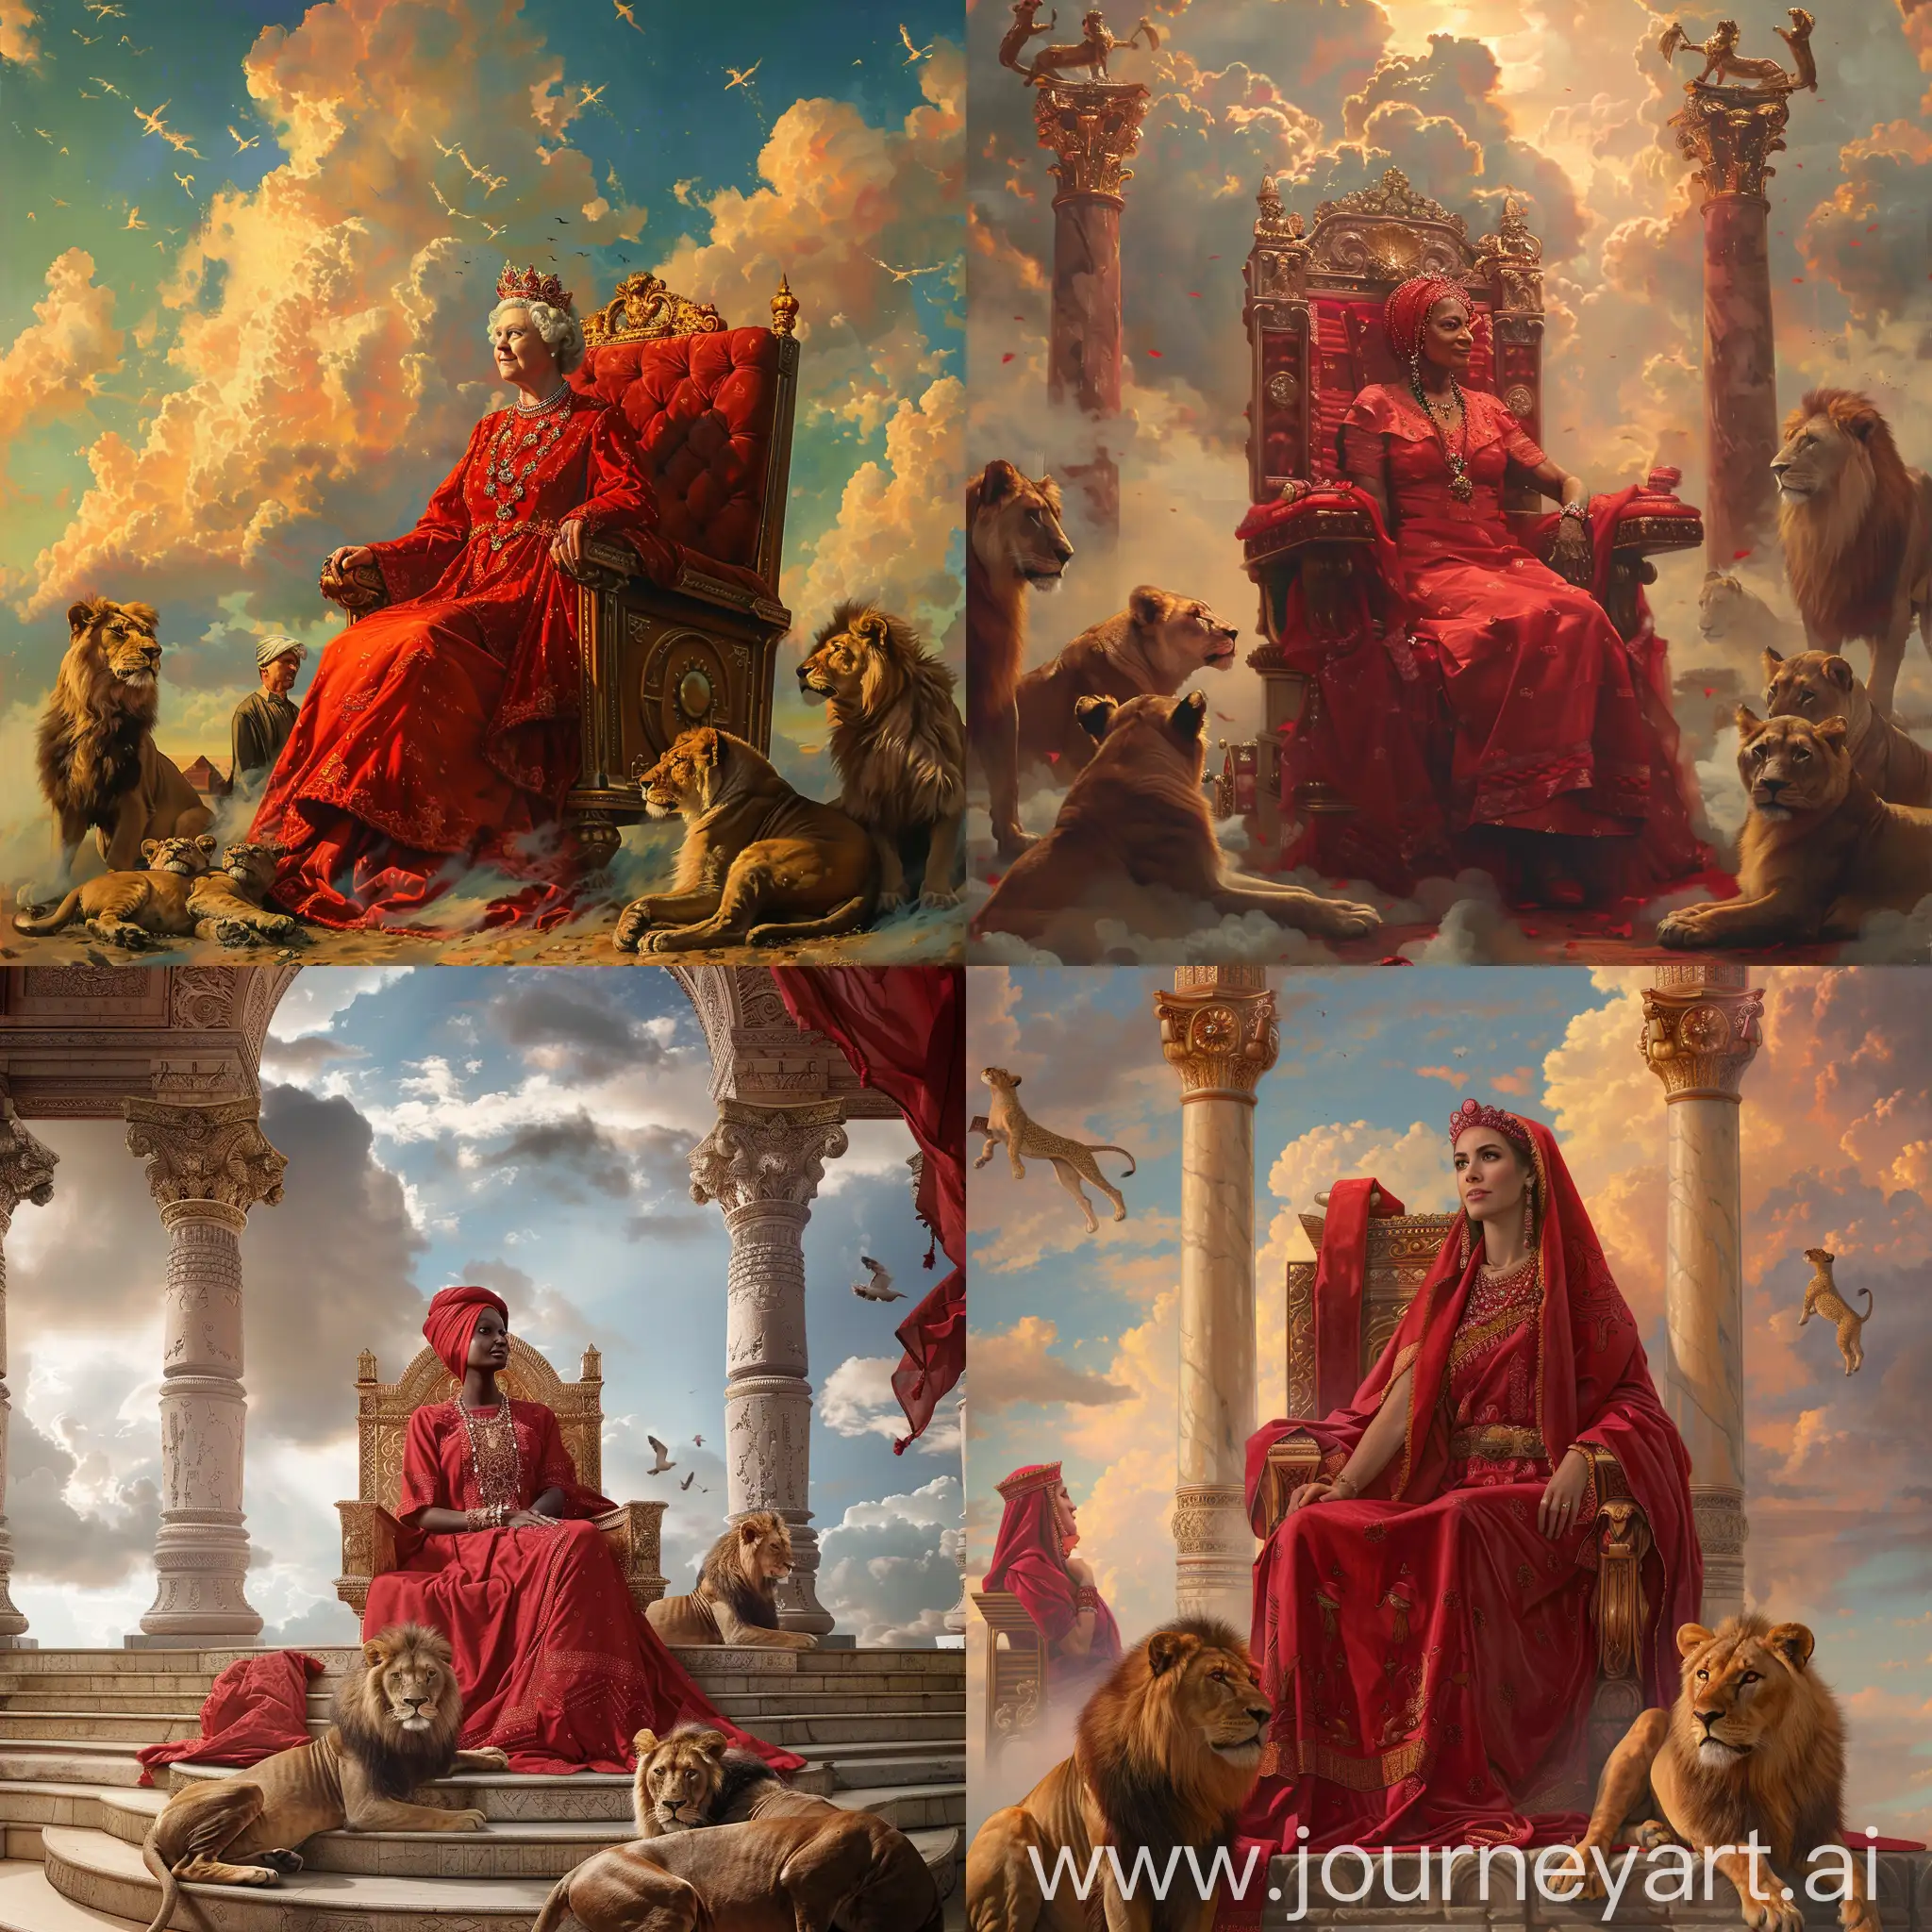 /IMAGINE ,OPEN KINGDOM IN SKY, QUEEN IN RED TRADITIONAL ATTIRE,SITTING ON THRONE ,LIONS BESIDES,MINISTER SITTING,